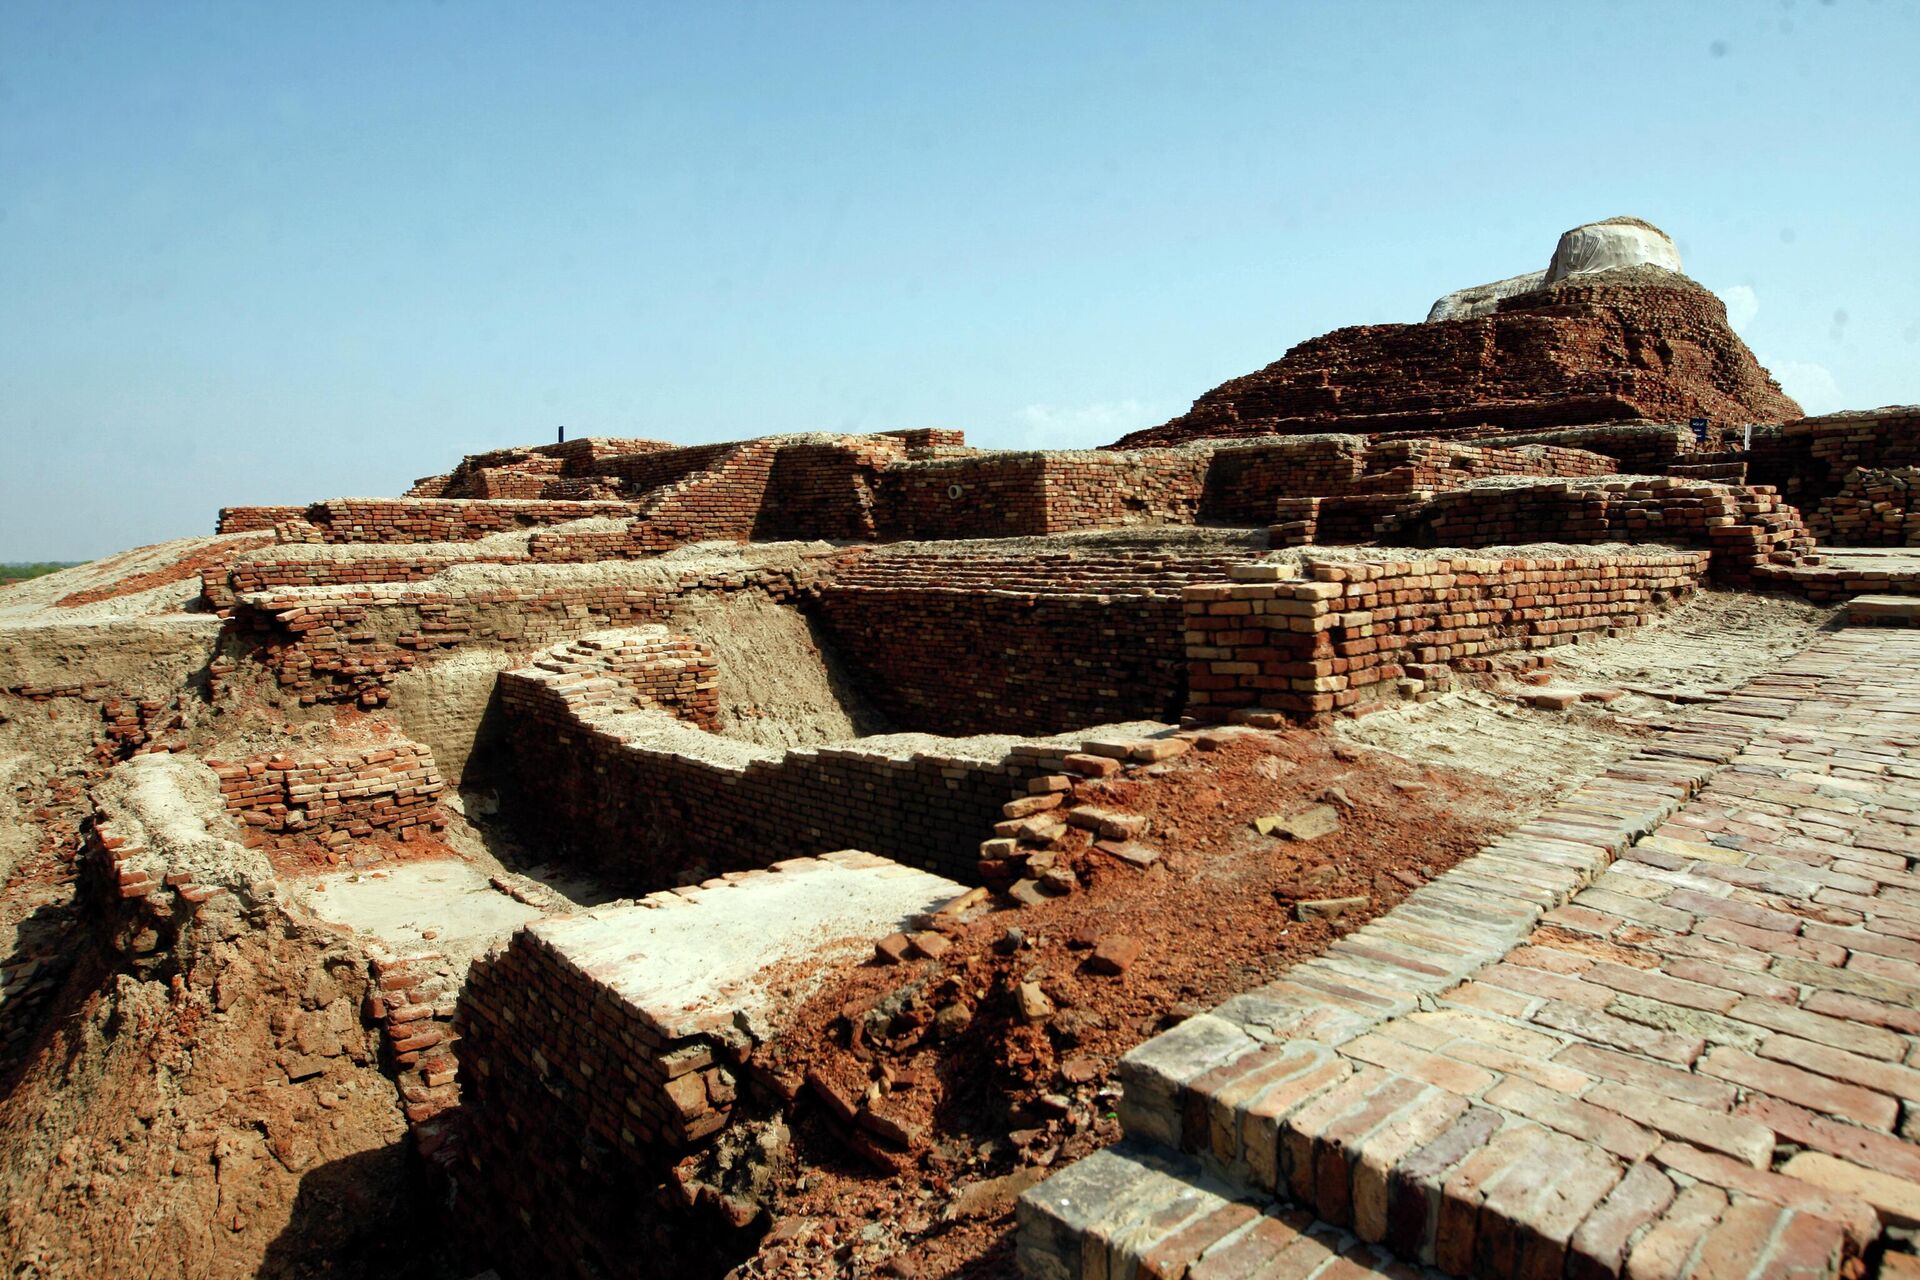 Ruins at Mohenjo Daro, a UNESCO World Heritage Site, in Mohenjo Daro, suffered damage from heavy rainfall, in Larkana District, of Sindh, Pakistan, Tuesday, Sept. 6, 2022. The rains now threaten the famed archeological site dating back 4,500 years.  - Sputnik International, 1920, 15.09.2022